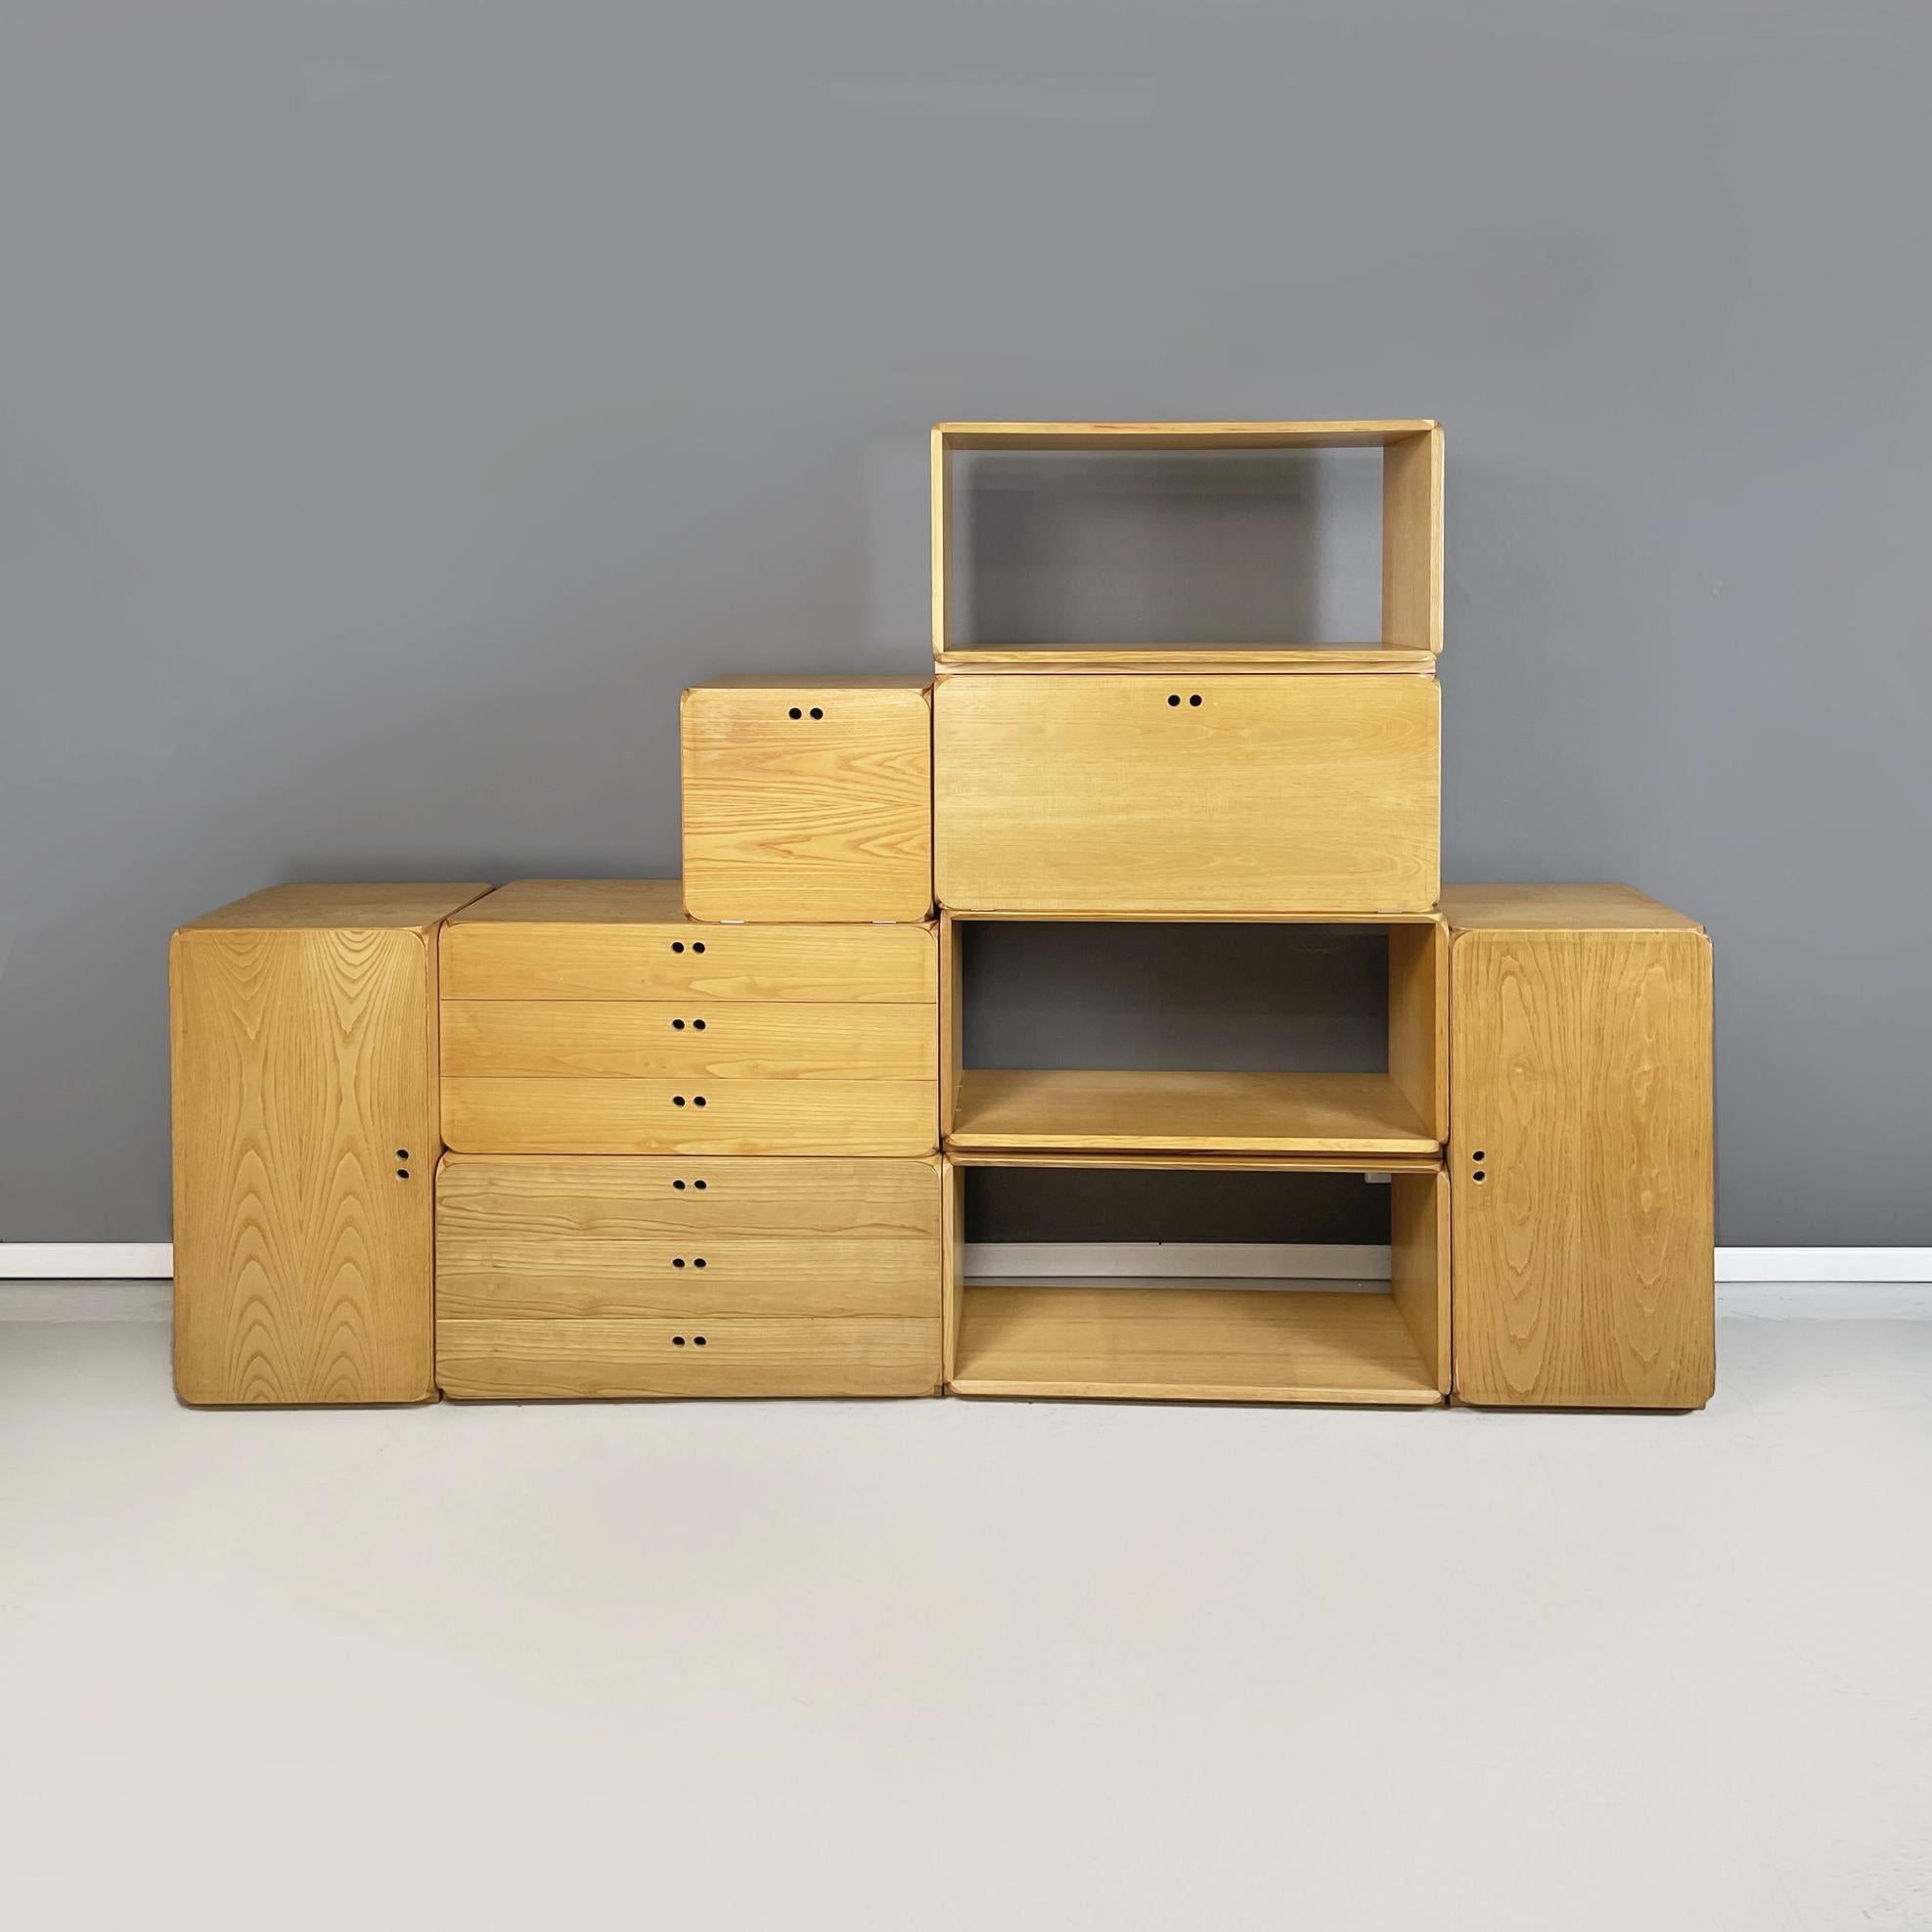 Italian modern Wooden modular bookcase or sideboard by Derk Jan De Vries, 1980s
Modular bookcase or storage-sideboard in light colored wood. The bookcase includes 9 modules with rounded corners. 2 rectangular modules with hinged door, 2 rectangular